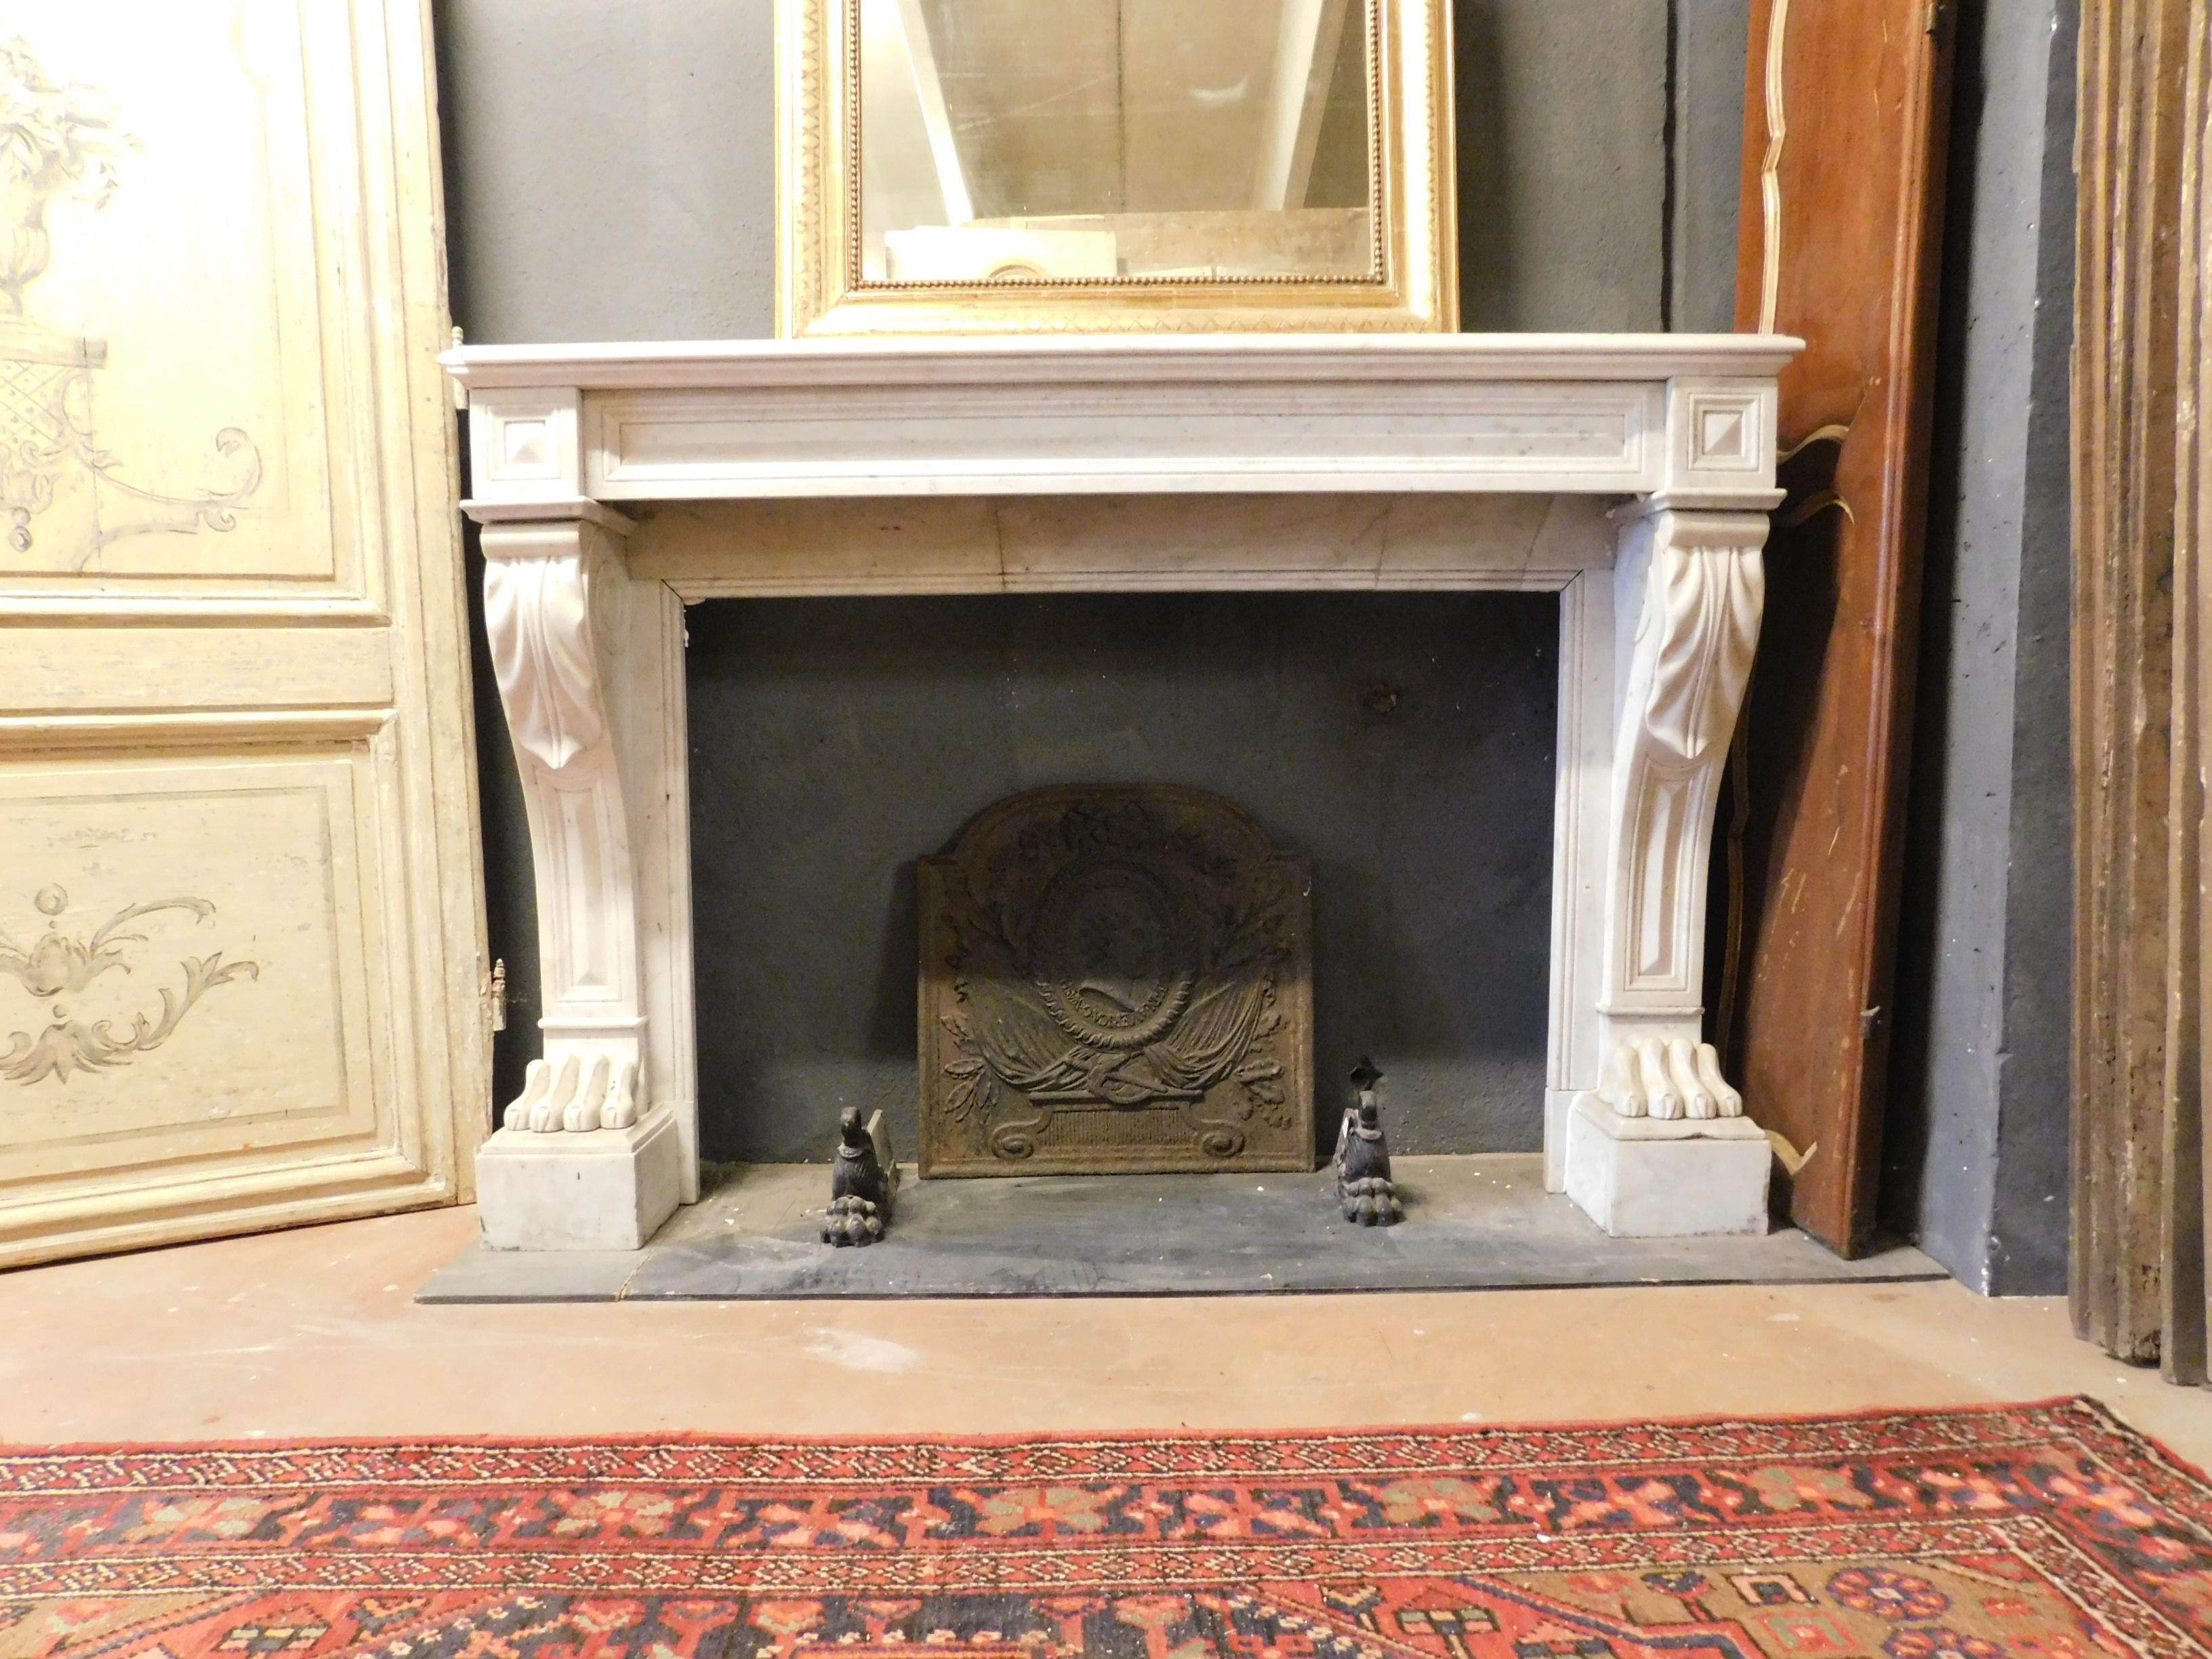 Ancient mantle fireplace in perfect Empire style, hand carved in white Carrara marble, has geometric shapes and lions legs on the feet, good state of conservation, produced in the early 1800s in France.
Perfect to give a classic and stylish effect